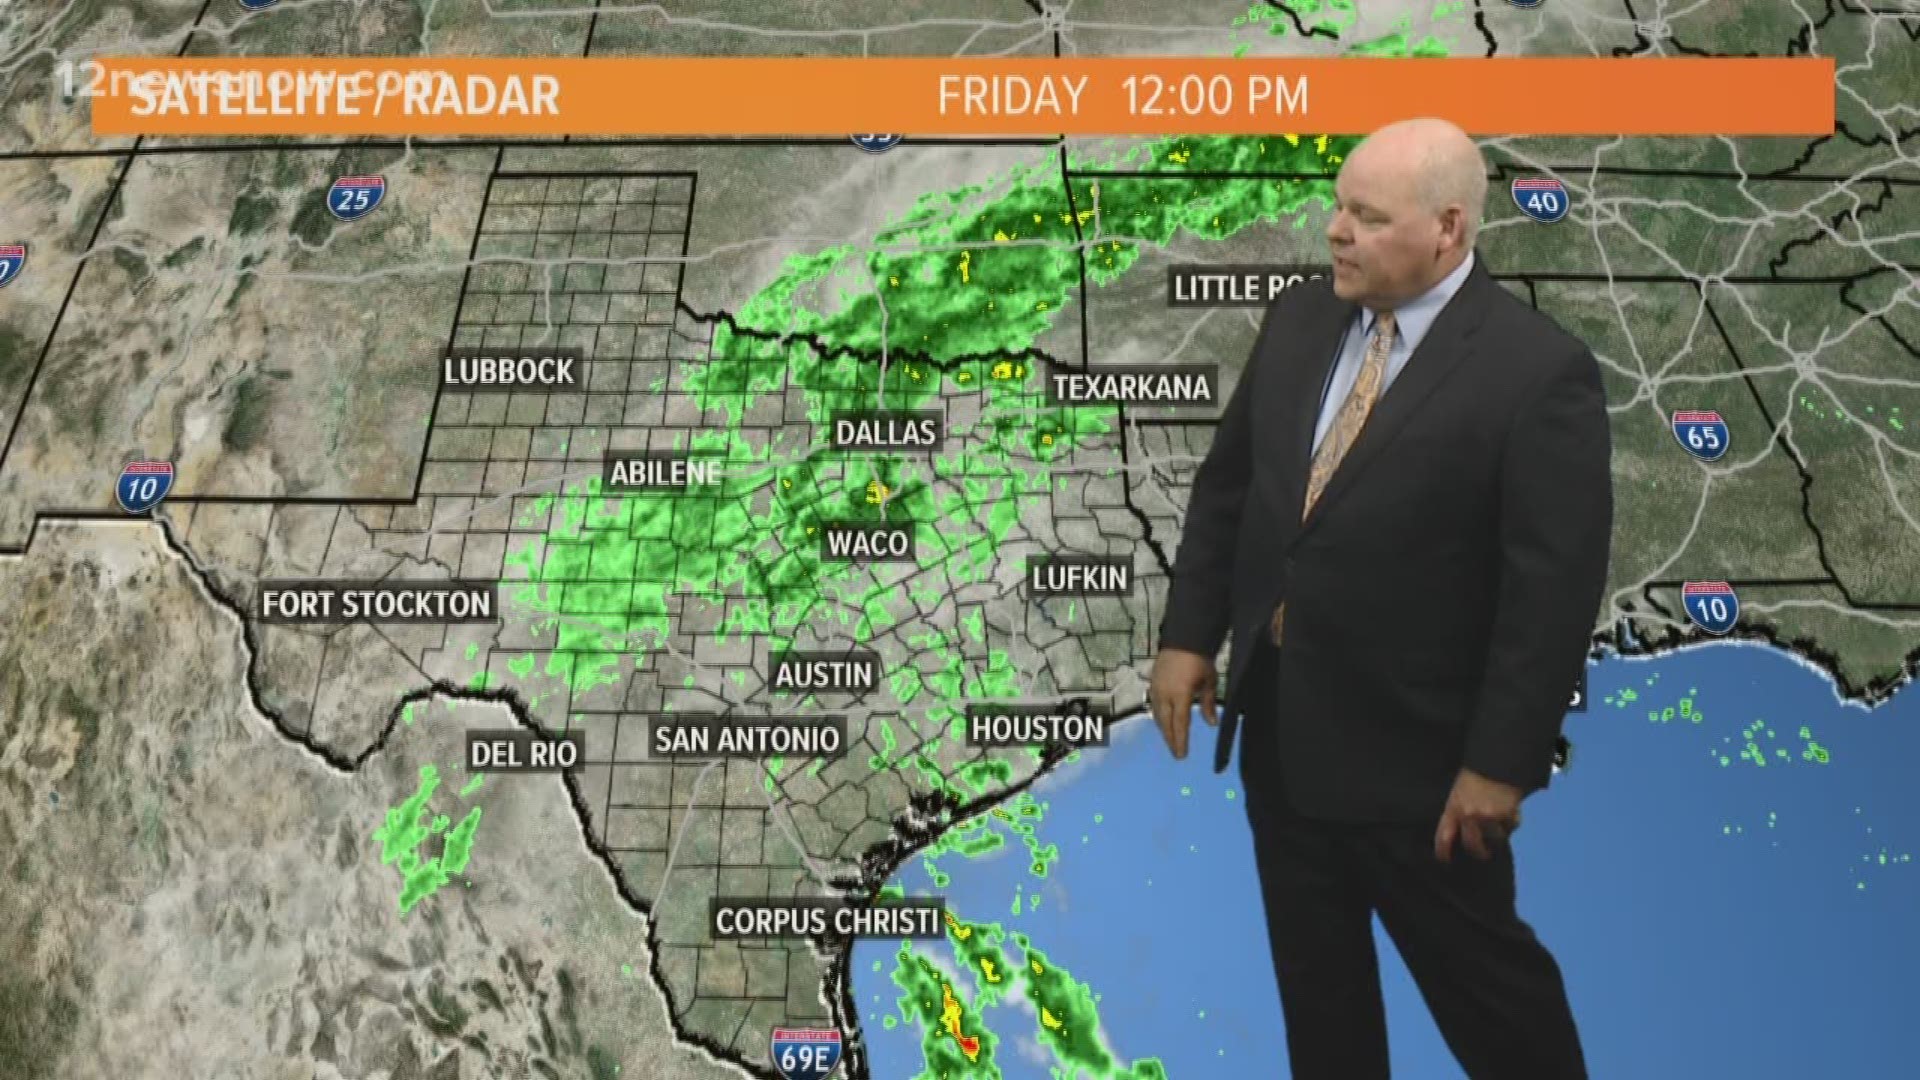 Mostly cloudy with chance of showers headed into the weekend